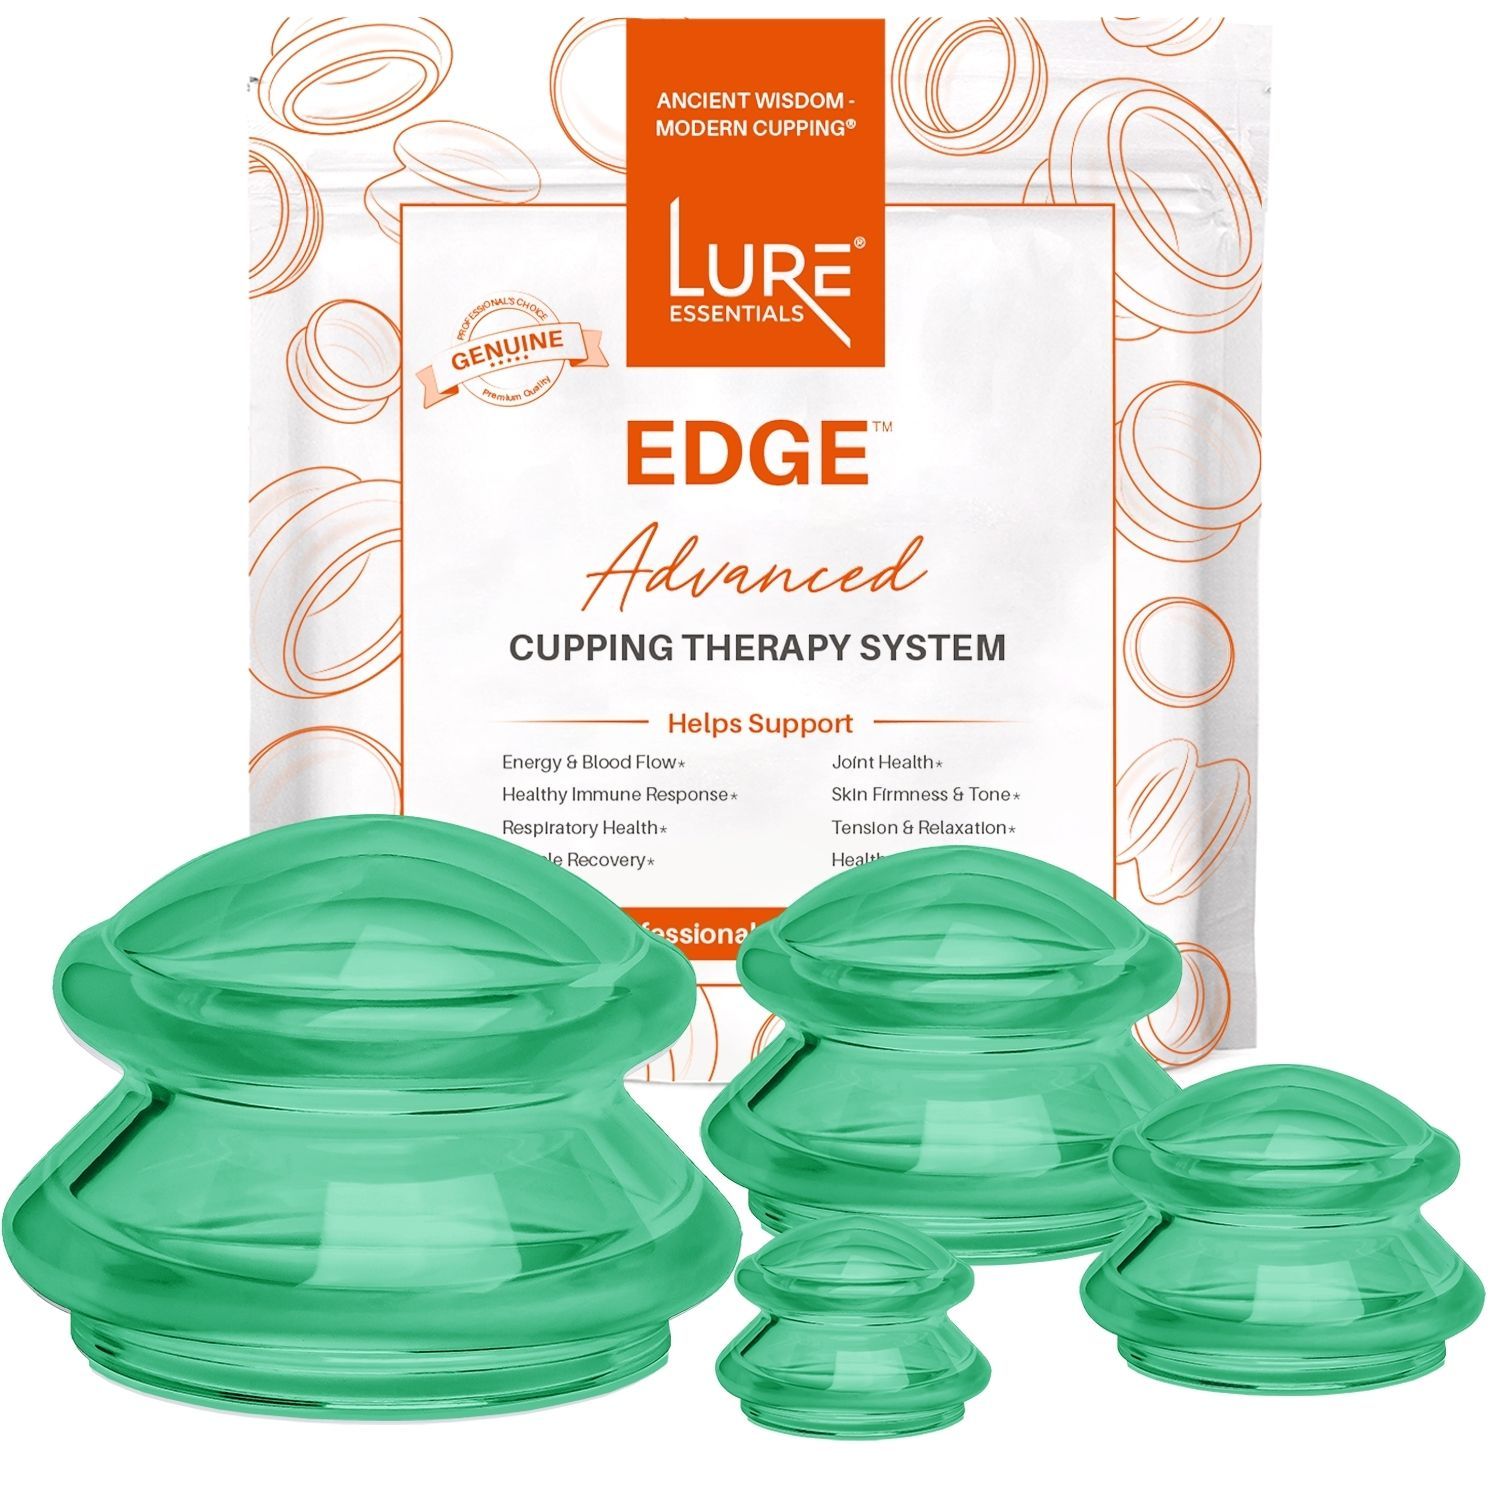 Lure Essentials Edge Cupping Therapy Set Silicone Home Cupping Therapy Massage Cellulite Cups 4